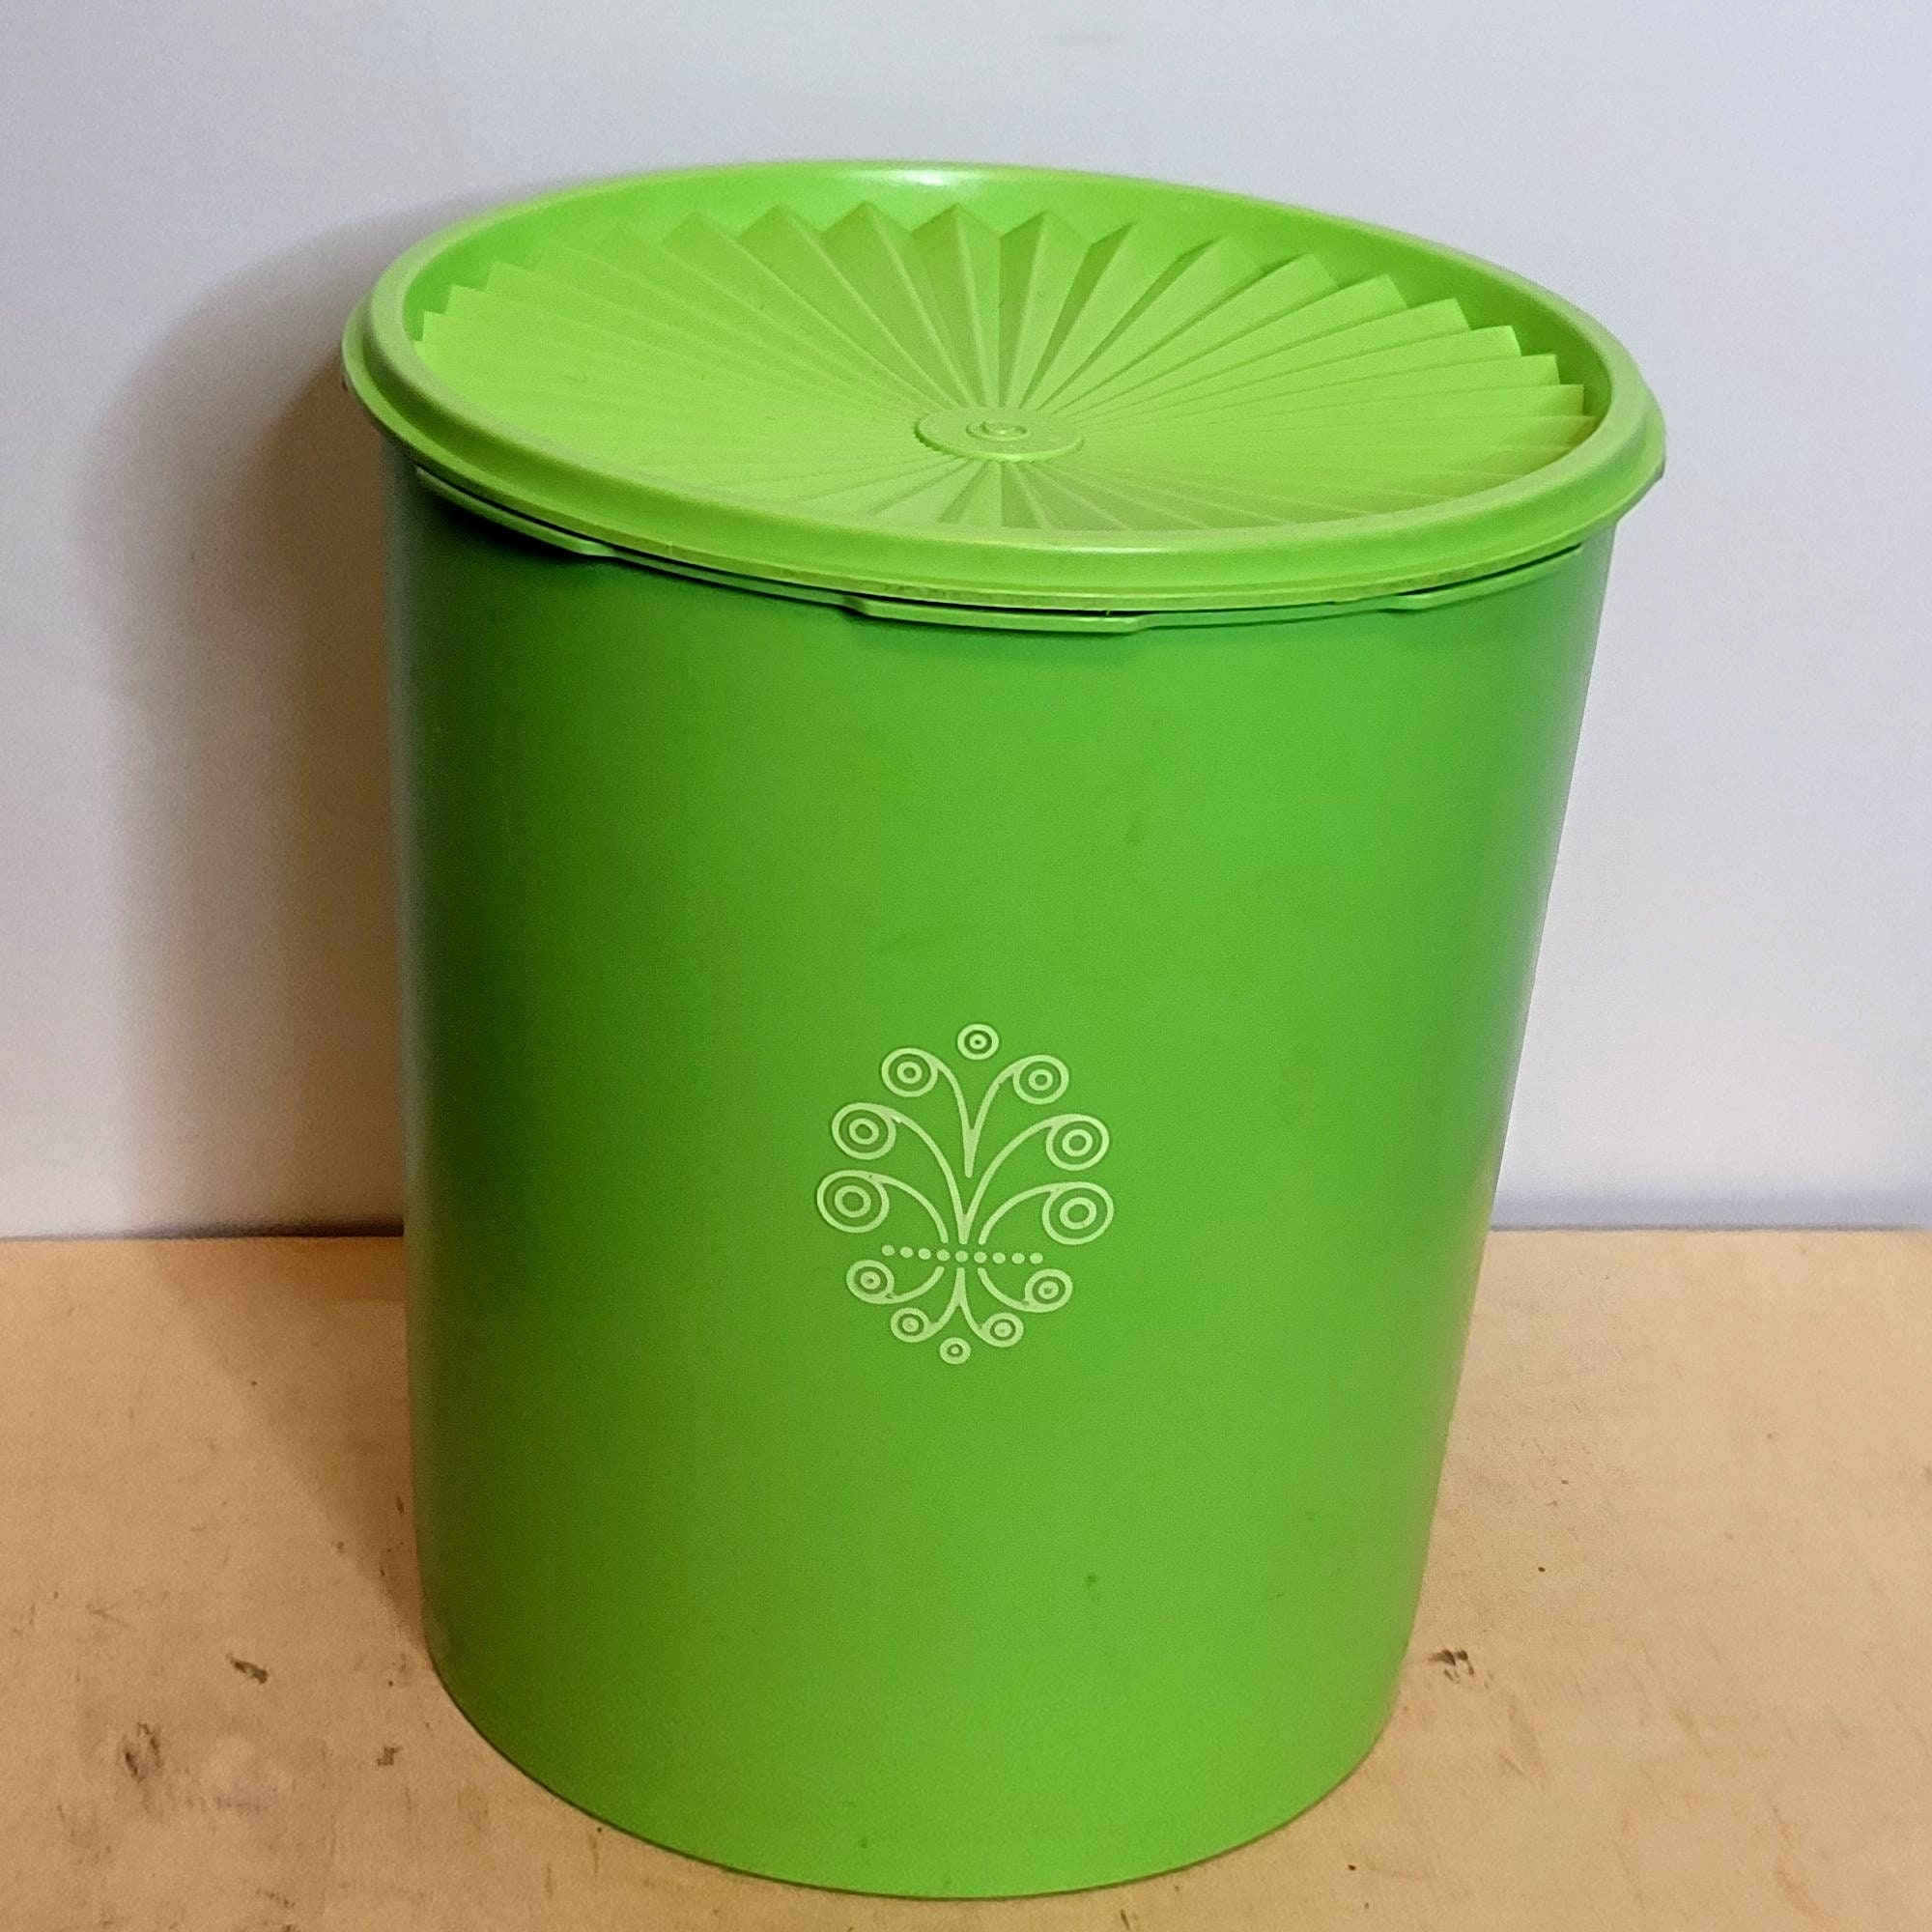 ▷ Buy Tupper food container Valira 0.5 liter green